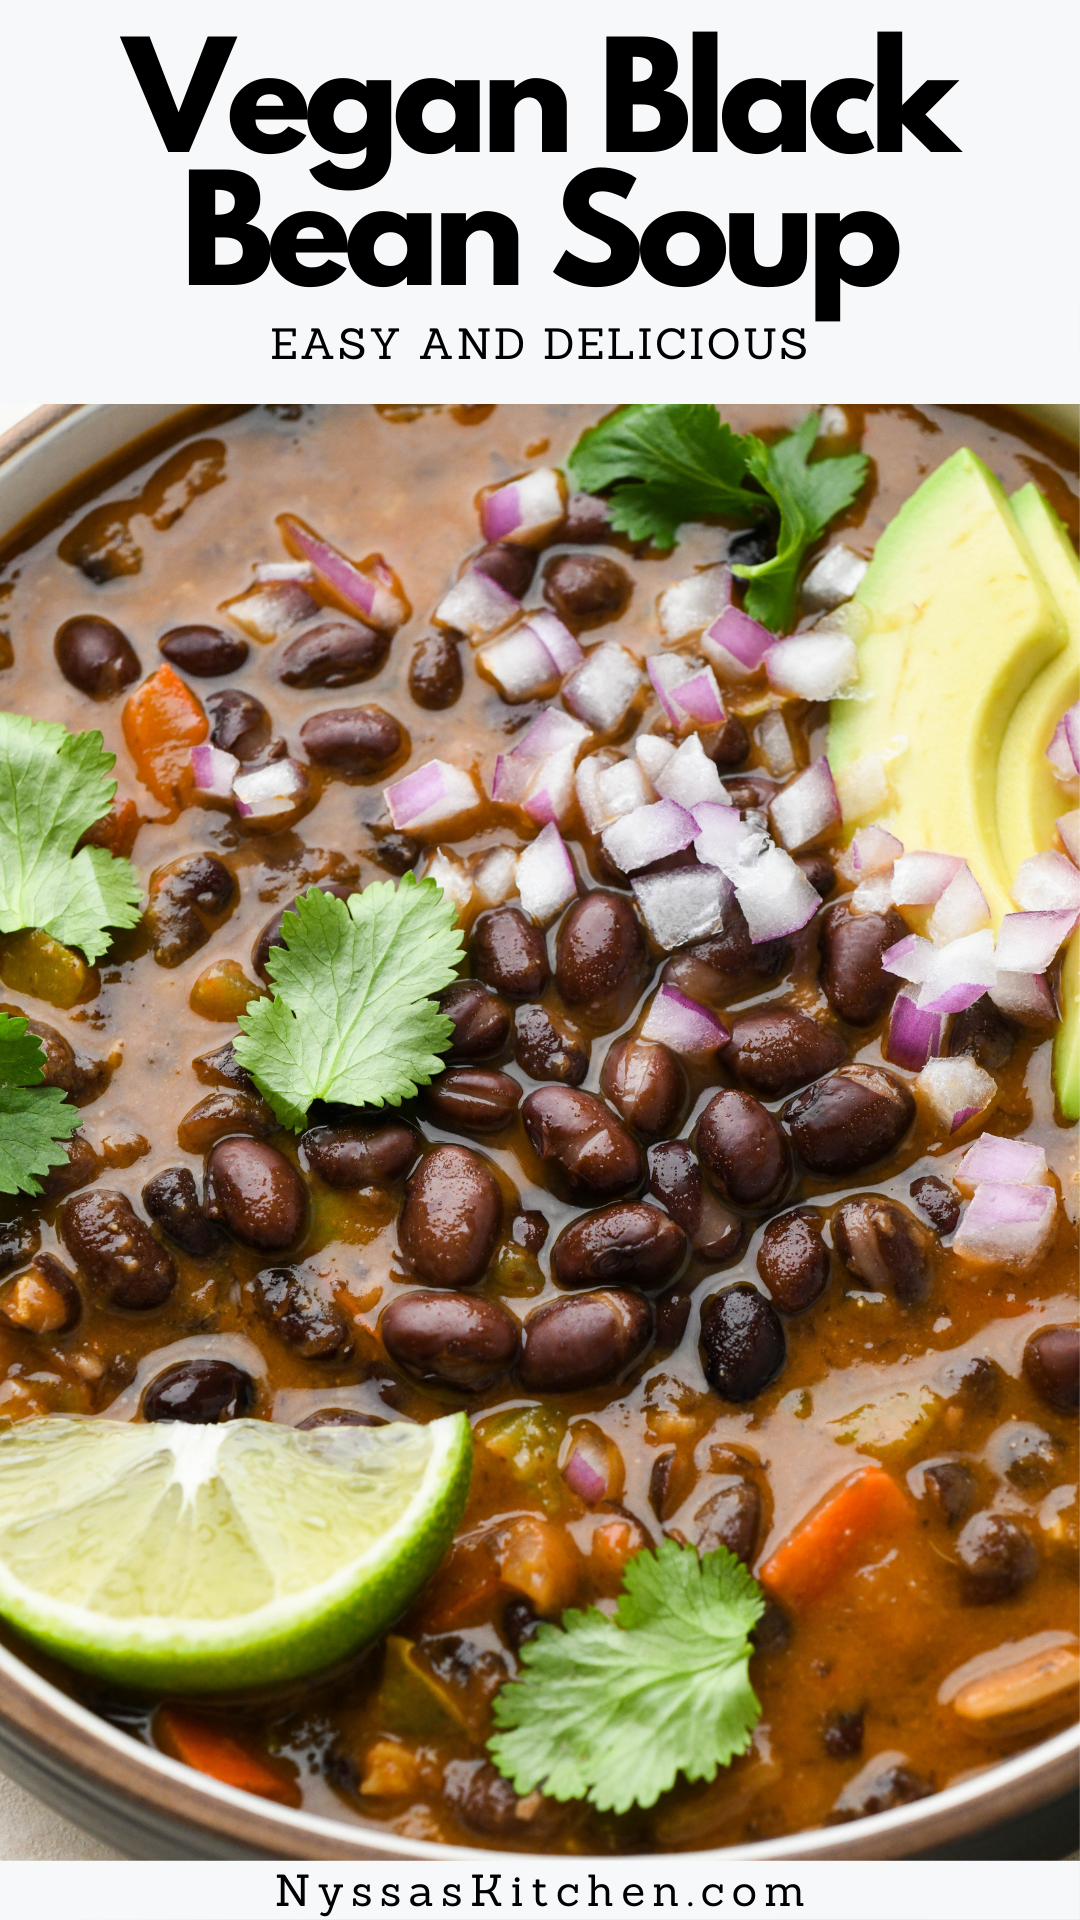 This vegan black bean soup is made with healthy, simple ingredients like canned black beans, veggies, and flavorful spices. Hearty and full of flavor! Top it with your favorite garnishes for a quick and easy dinner that the whole family will love. A Mexican inspired soup that freezes well and is great for weekend meal prep. Vegan, vegetarian, gluten free, and dairy free.